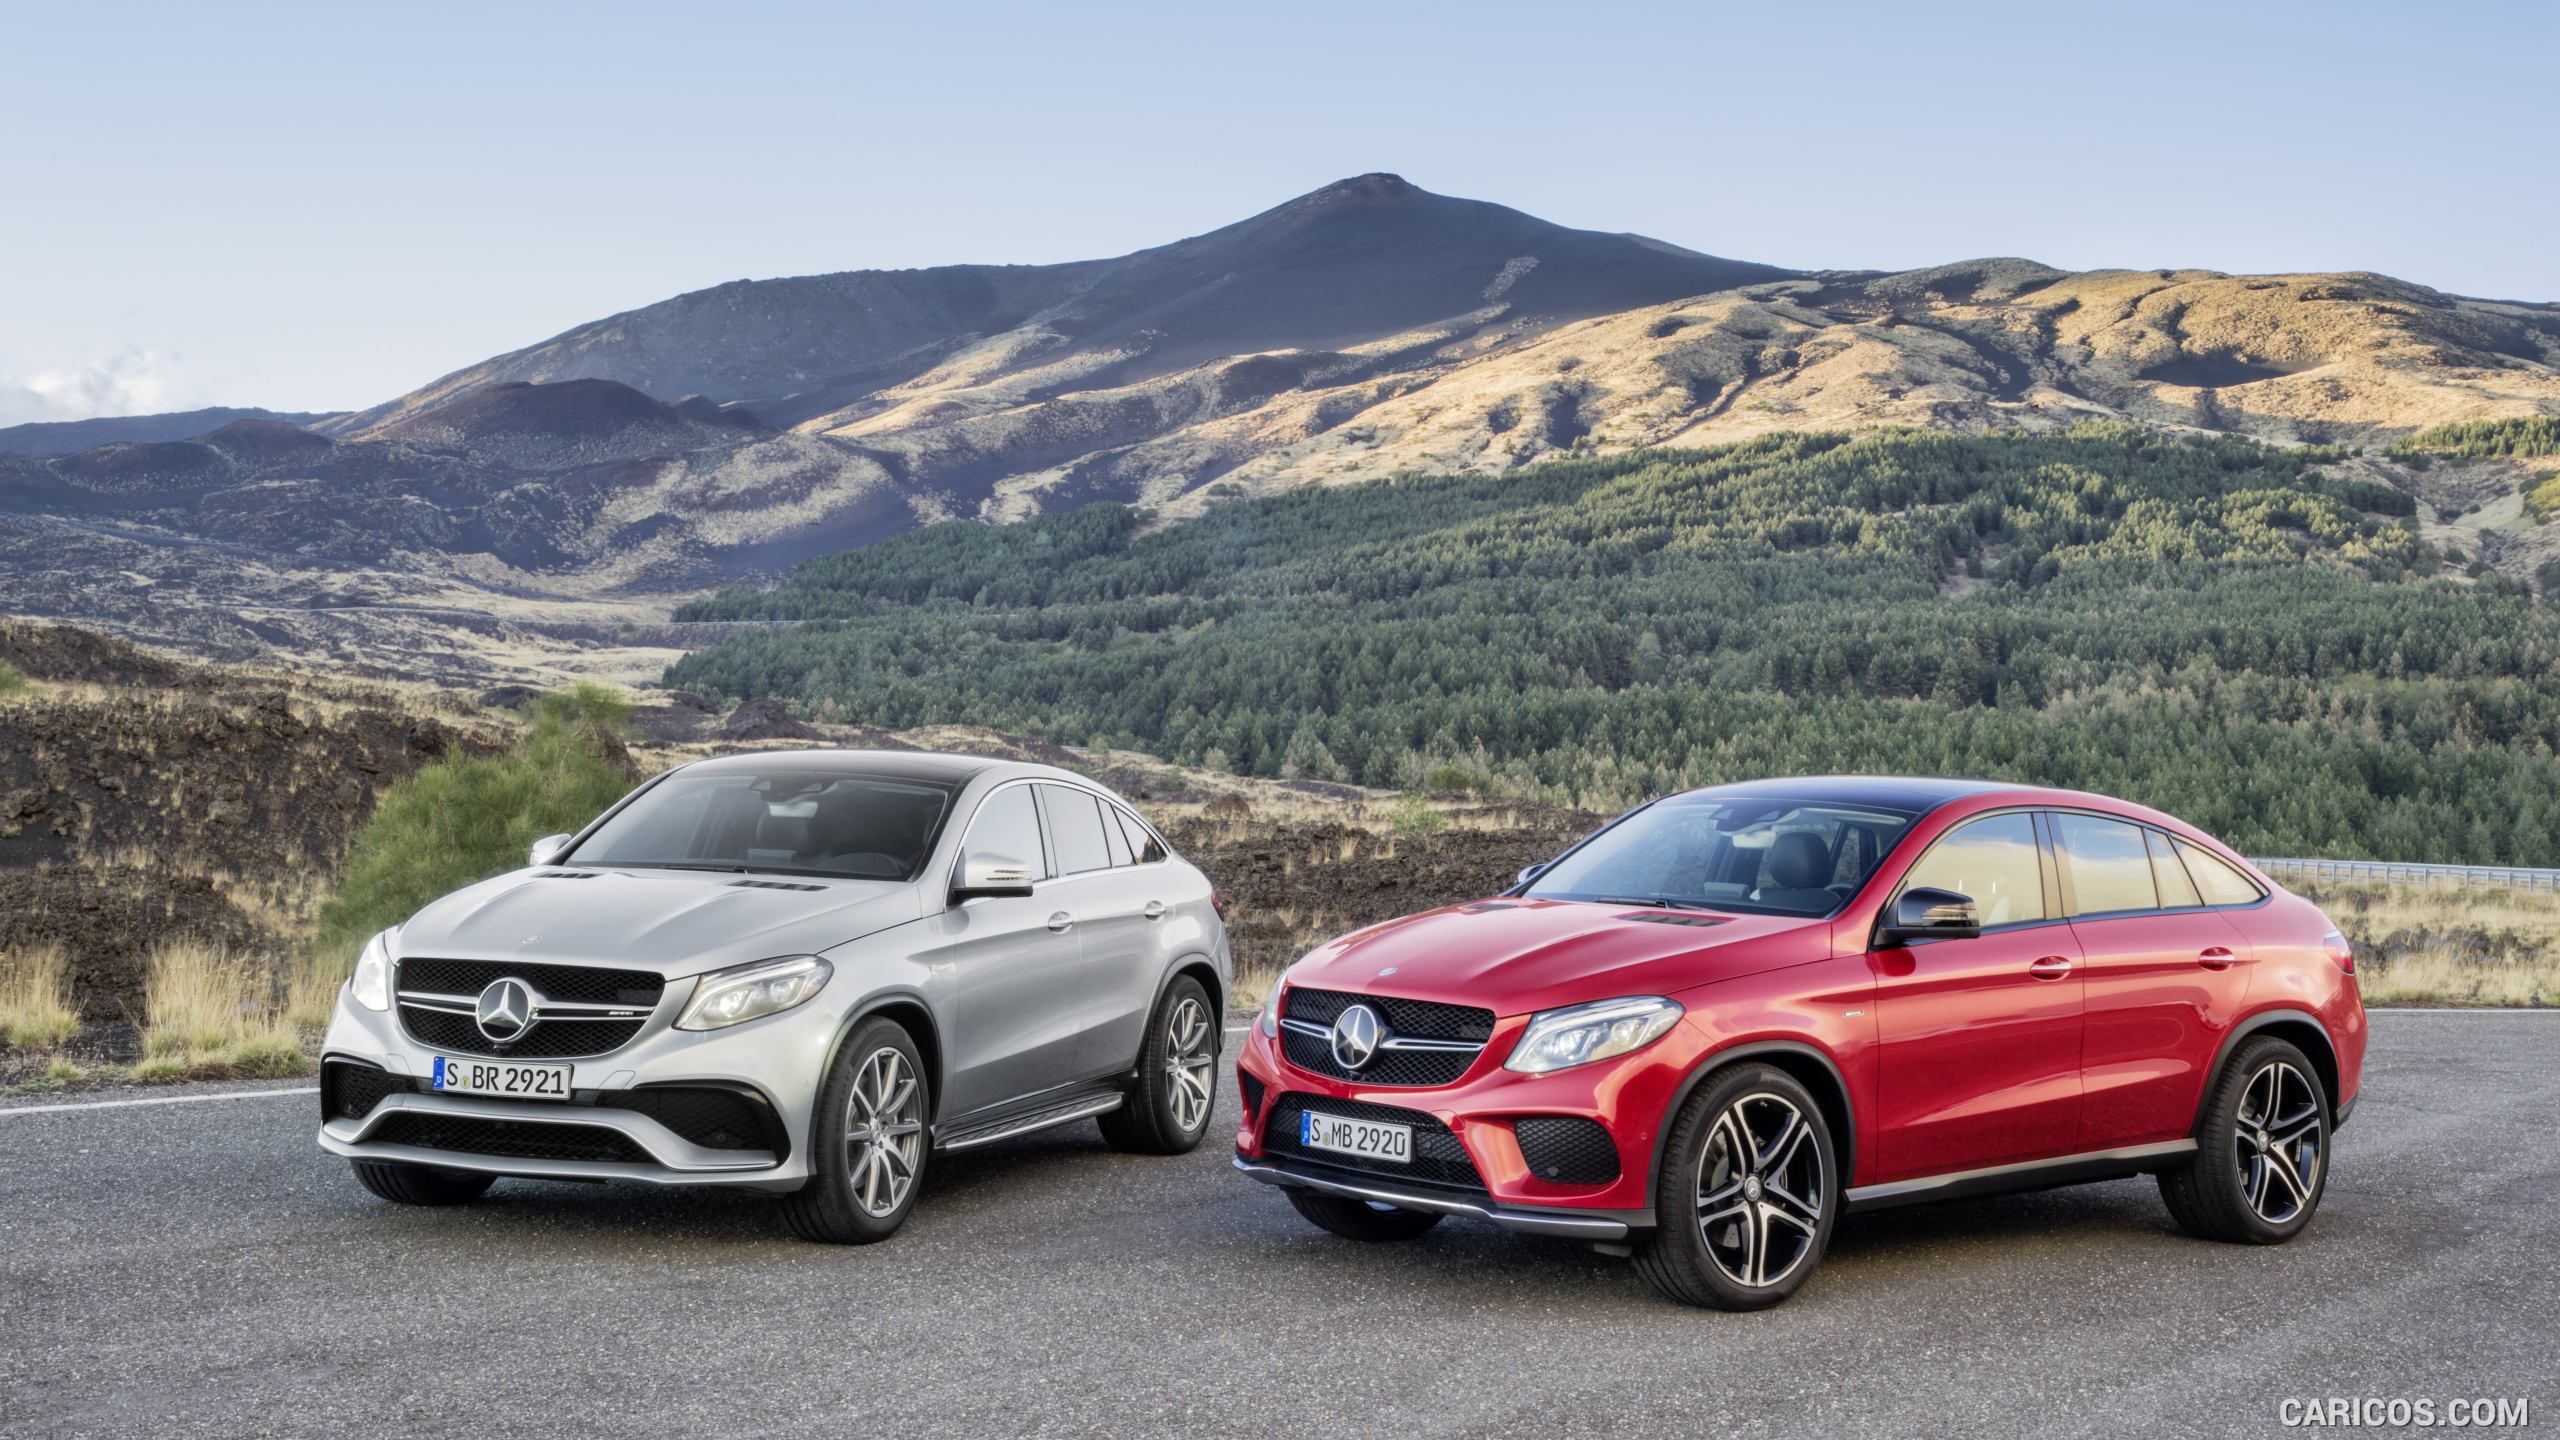 2016 Mercedes-Benz GLE 450 AMG Coupe 4MATIC (Designo Hyacinth Red Metallic) and Mercedes-AMG GLE 63 Coupé - Front, #28 of 115